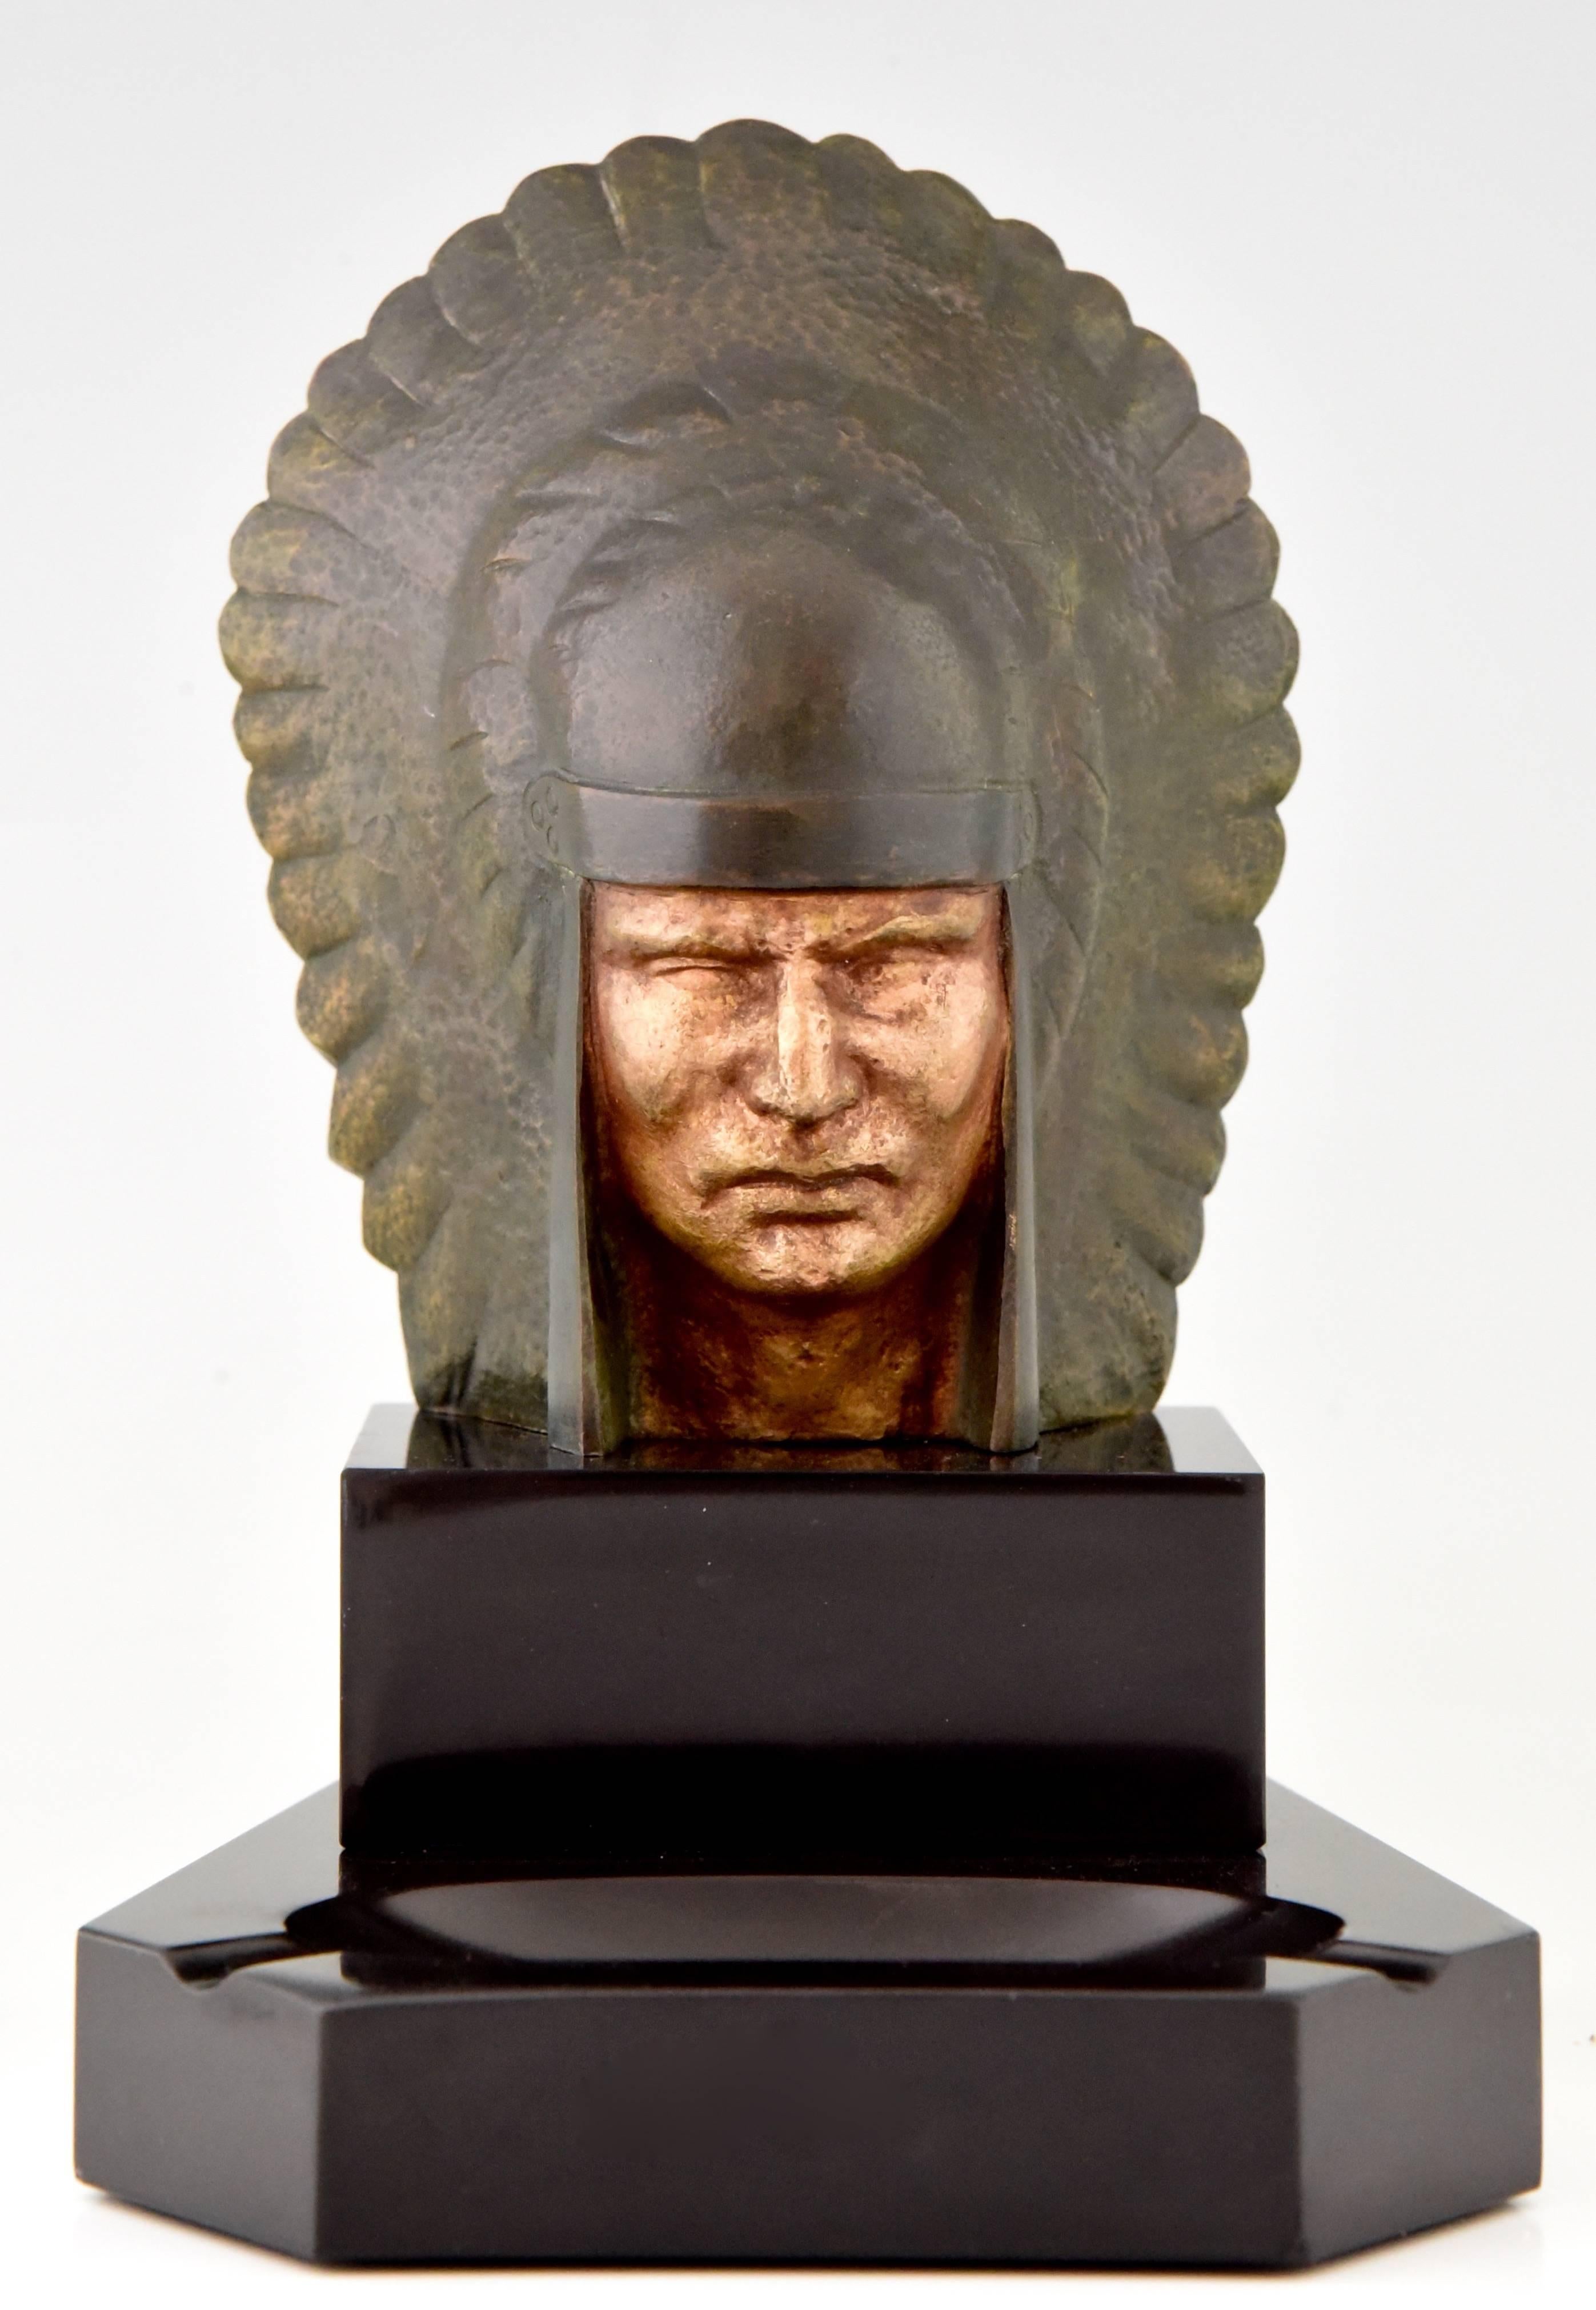 Stylish Art Deco bronze and marble ashtray with bust of an Indian by the French artist Georges Garreau.

Artist / Maker :
Georges Garreau.
Signature / Marks :
G. Garreau. 
Style :
Art Deco.
Date :
1930. 
Material :
Multi-color patina